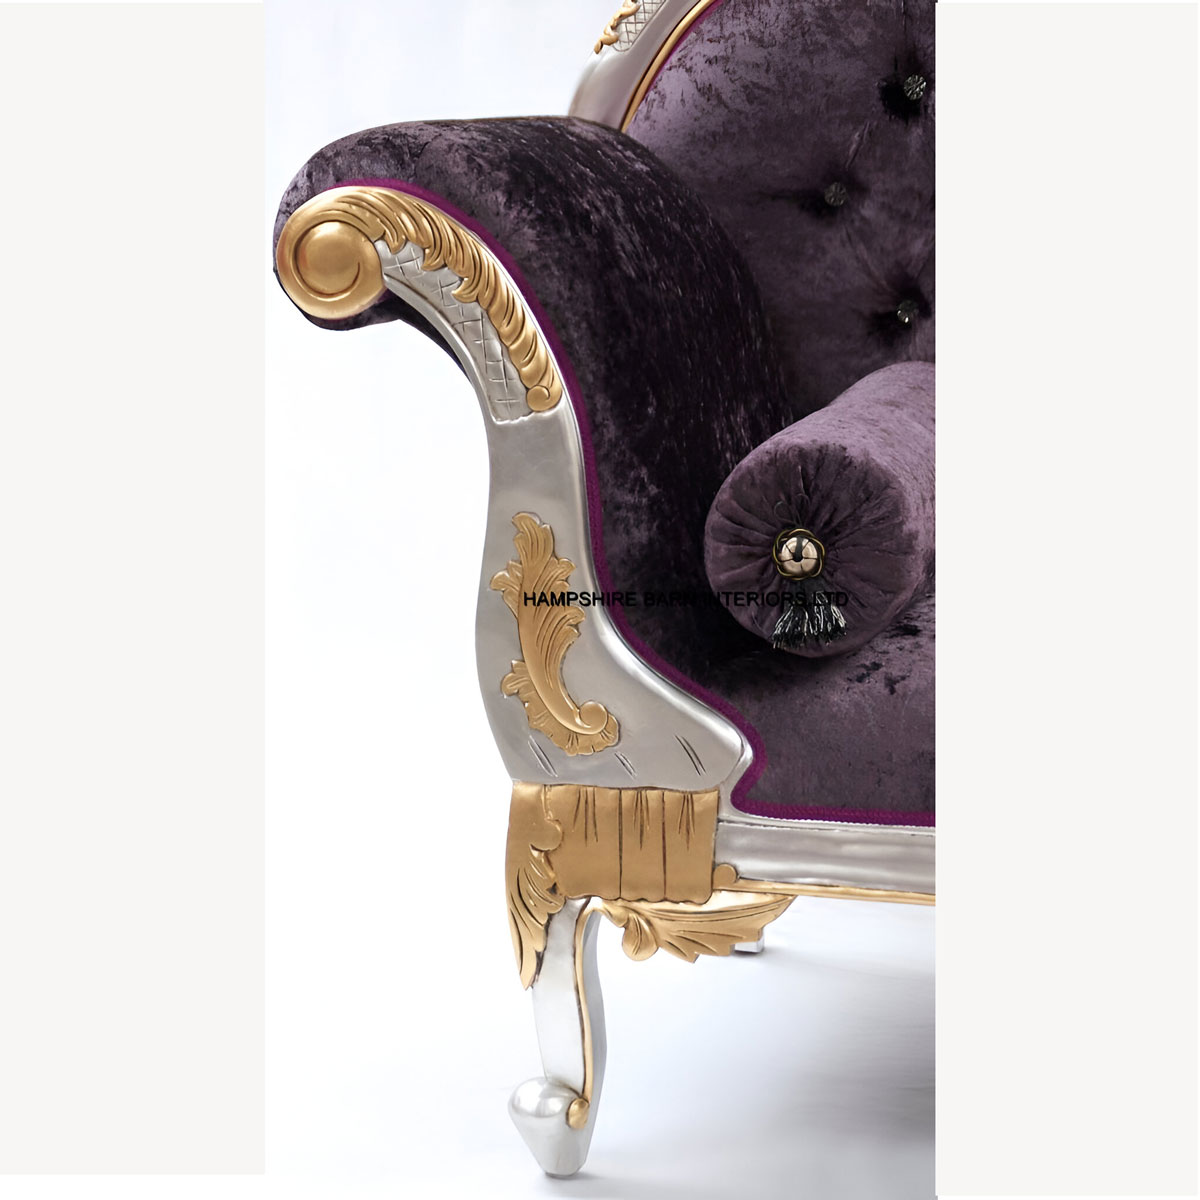 Gold And Silver Framed Hampshire Chaise With Purple Mulberry Crushed Velvet And Crystal Buttons 2 - Hampshire Barn Interiors - Gold And Silver Framed Hampshire Chaise With Purple Mulberry Crushed Velvet And Crystal Buttons -